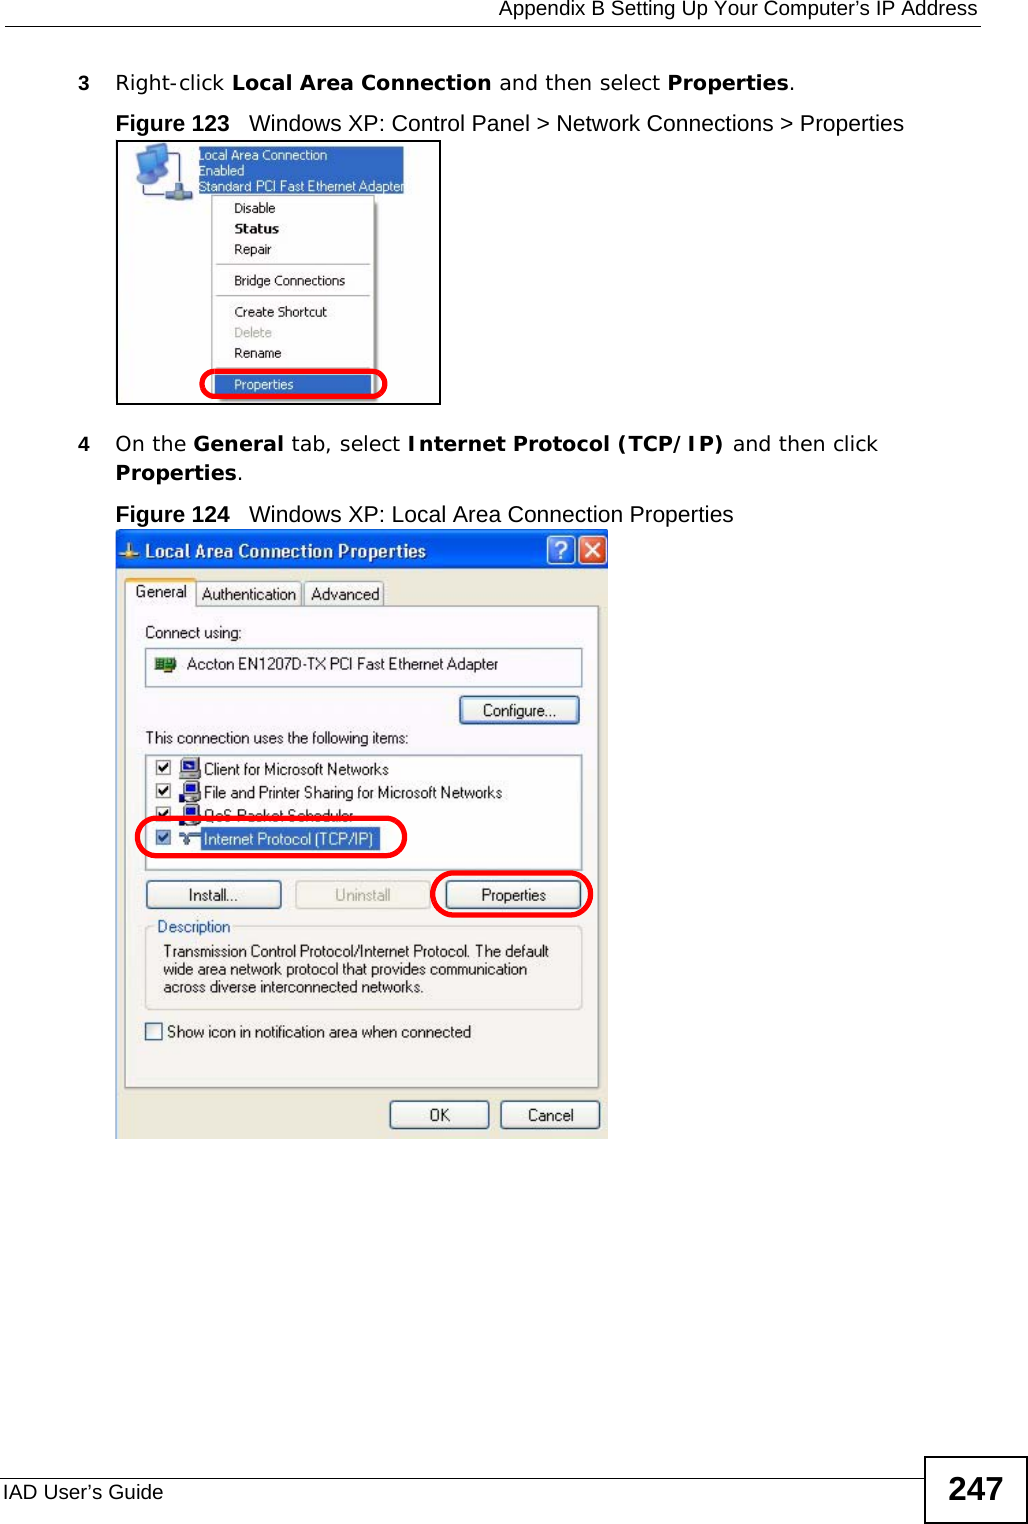  Appendix B Setting Up Your Computer’s IP AddressIAD User’s Guide 2473Right-click Local Area Connection and then select Properties.Figure 123   Windows XP: Control Panel &gt; Network Connections &gt; Properties4On the General tab, select Internet Protocol (TCP/IP) and then click Properties.Figure 124   Windows XP: Local Area Connection Properties